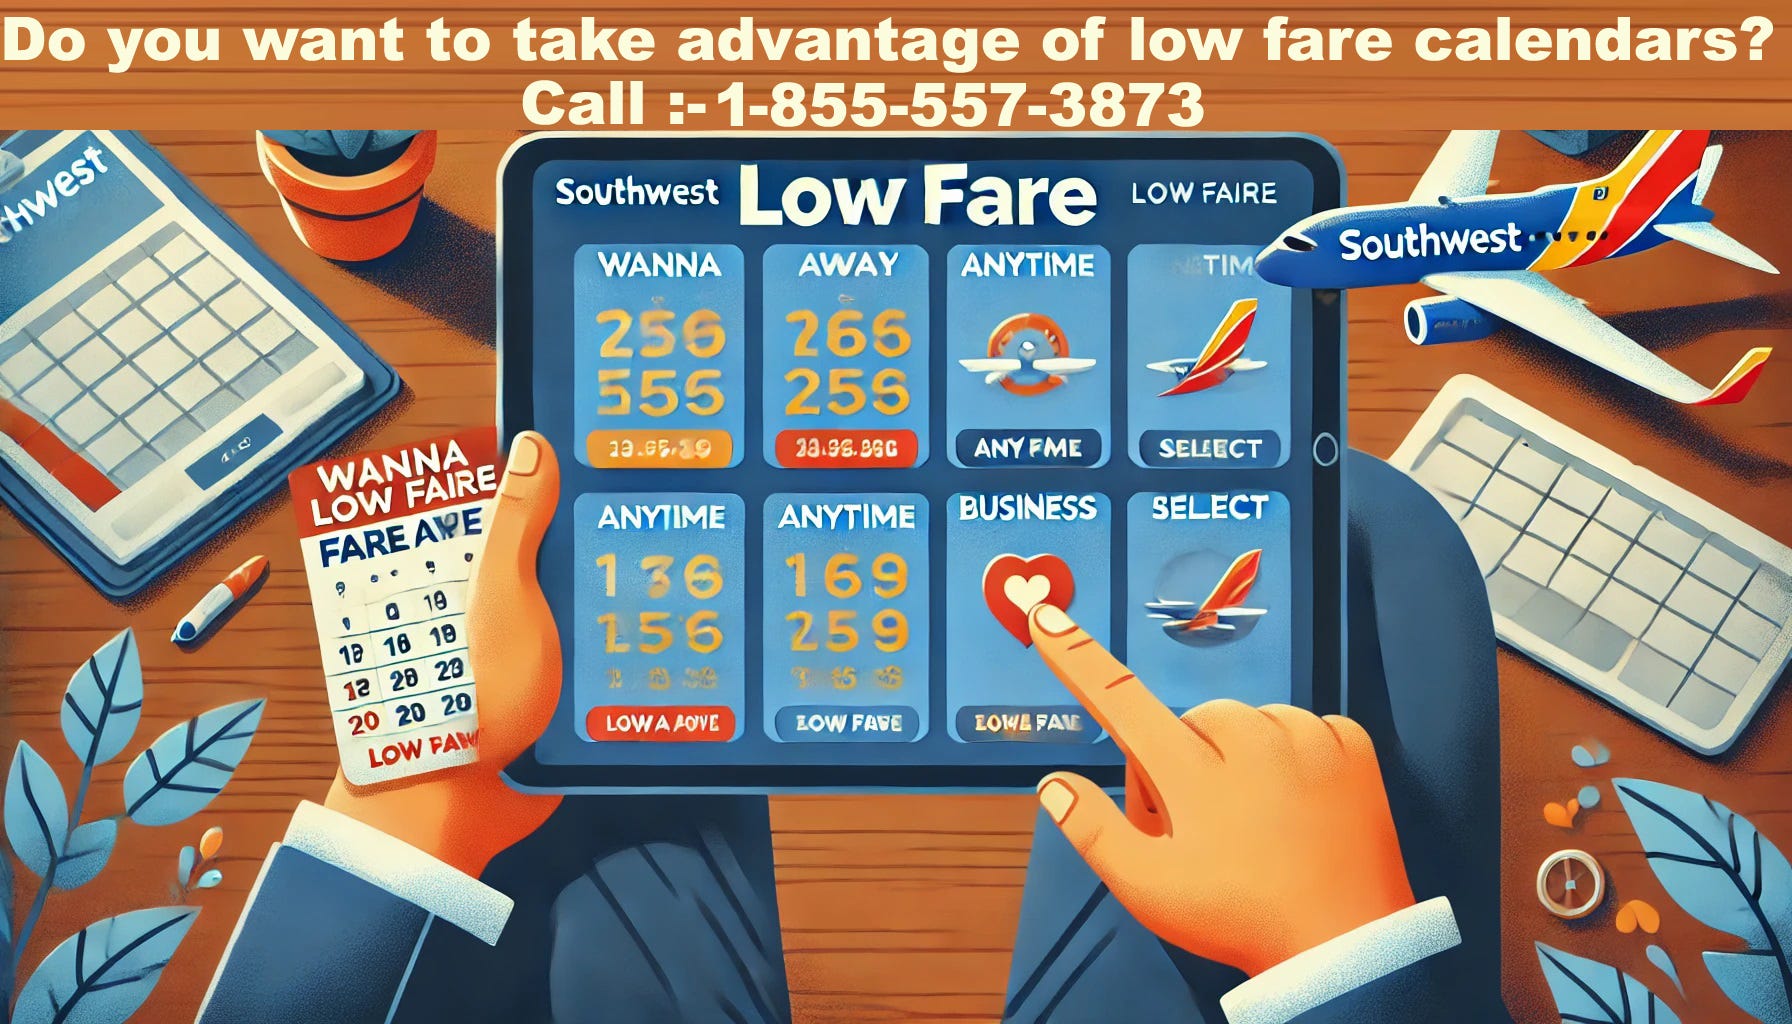 Southwest Low Fare Calendar: Find Cheap Flights with Southwest Airline